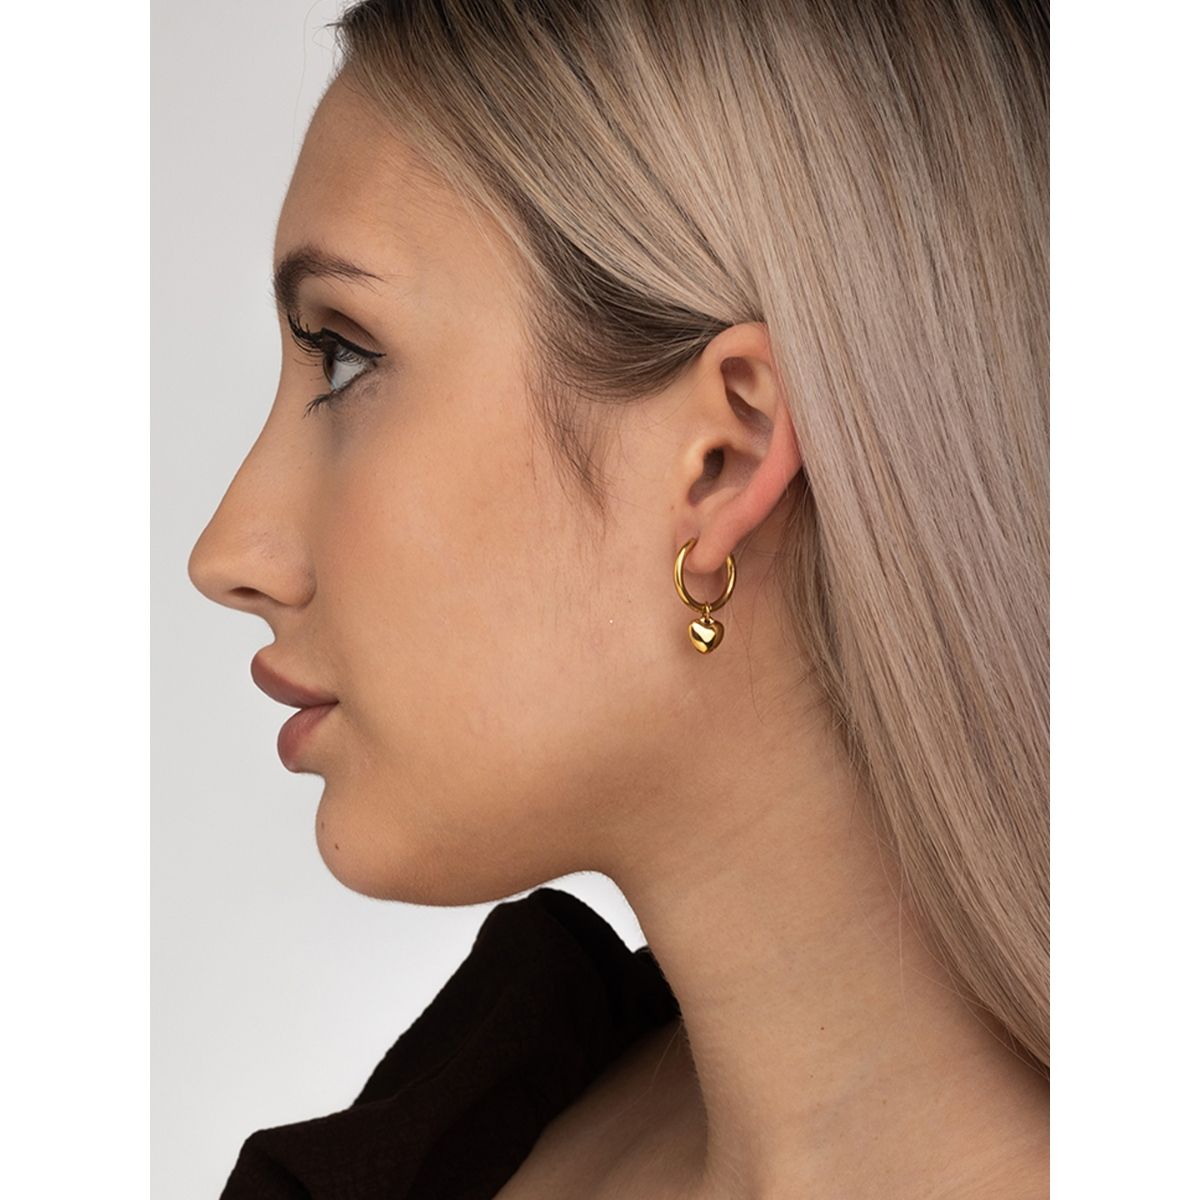 Shop Small Gold Earrings Online  Earrings For Daily Use  STAC Fine  Jewellery